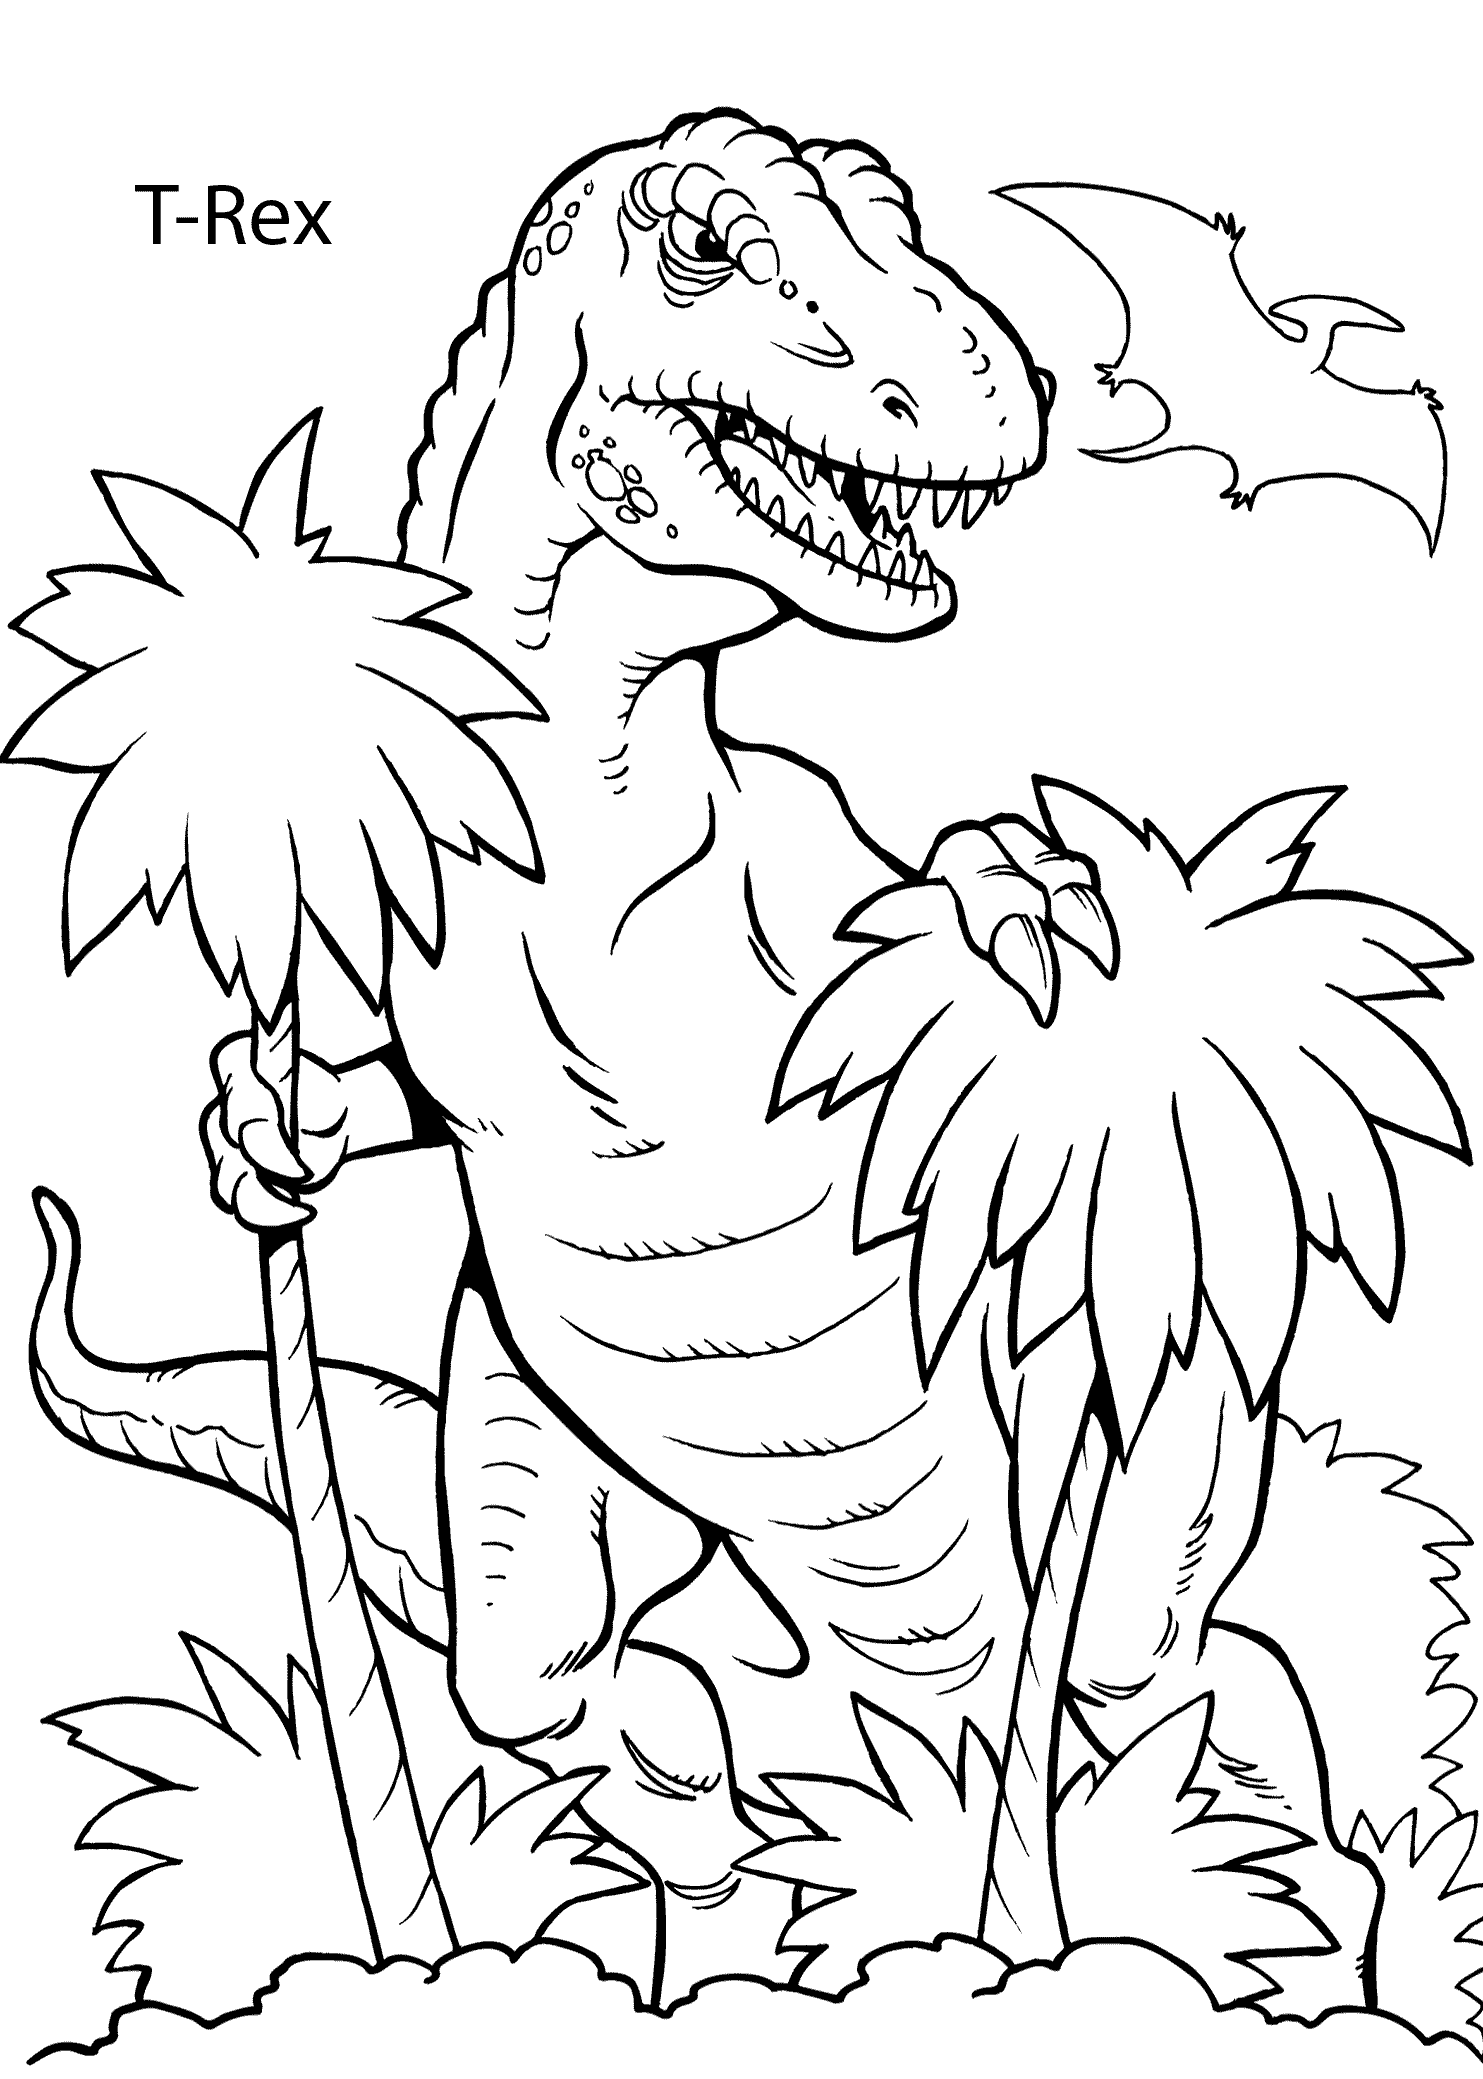 T-Rex Dinosaur Coloring Pages For Kids, Printable Free - Coloring Home